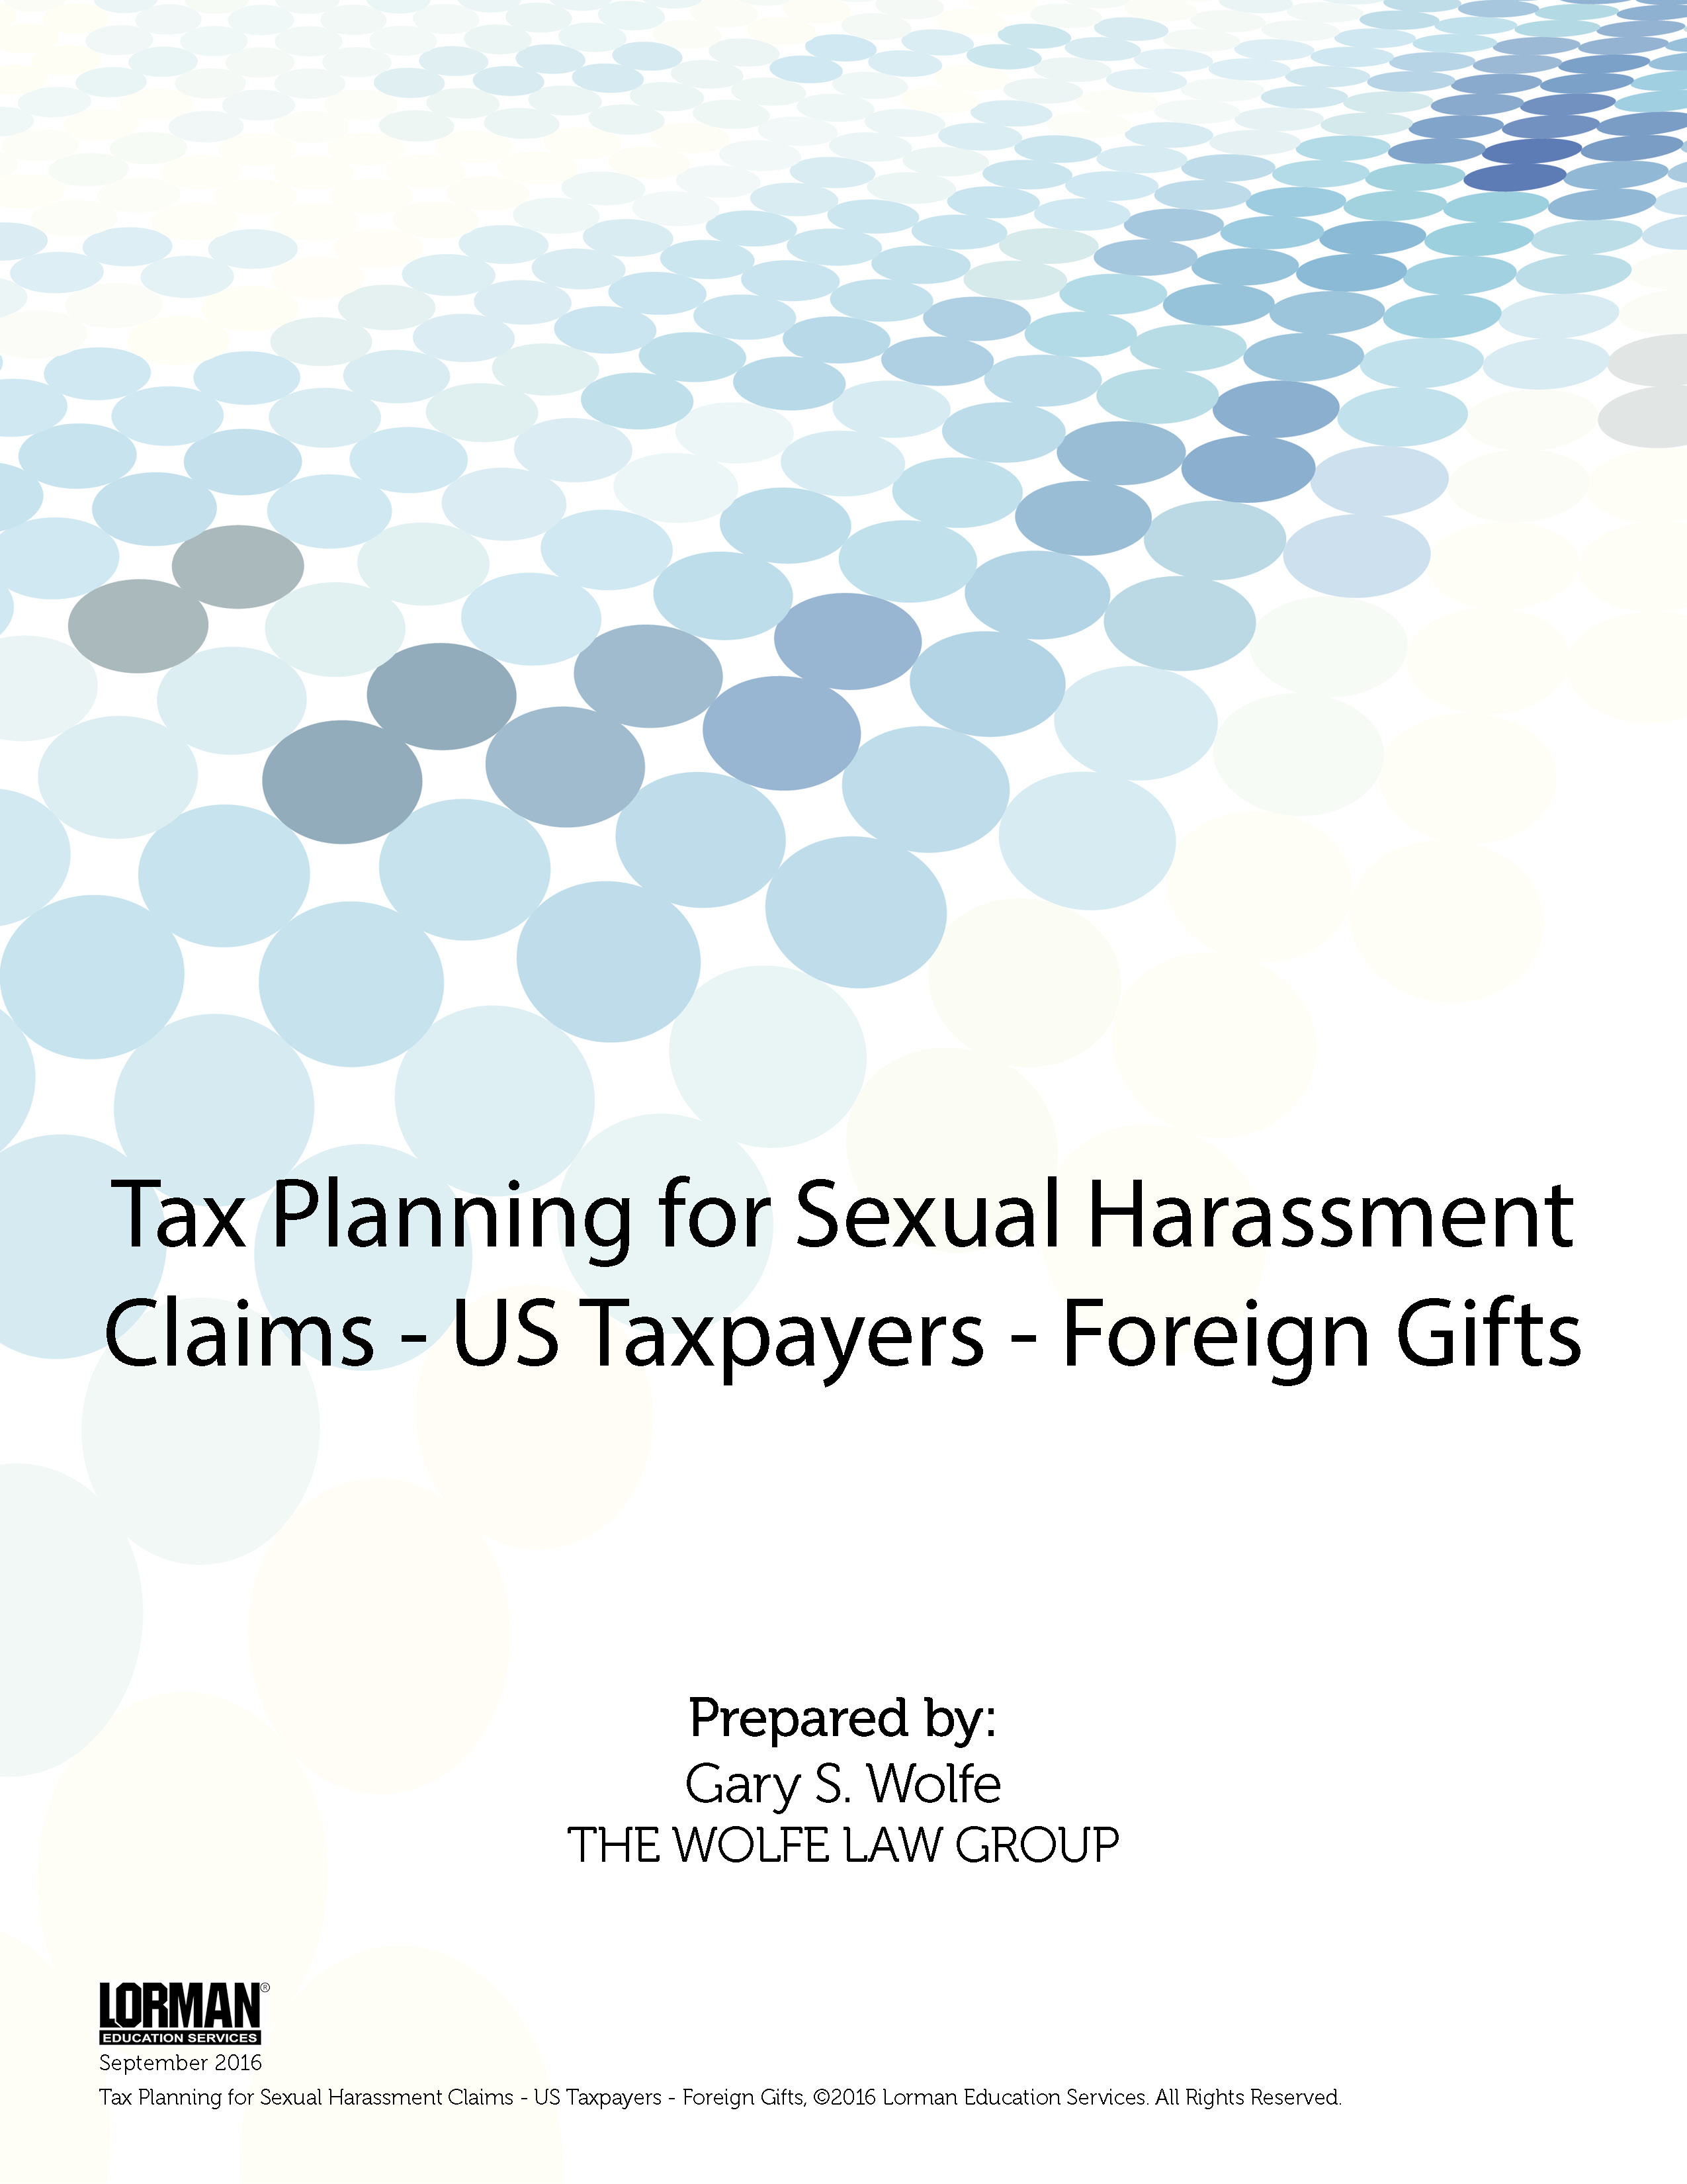 Tax Planning for Sexual Harassment Claims - US Taxpayers - Foreign Gifts